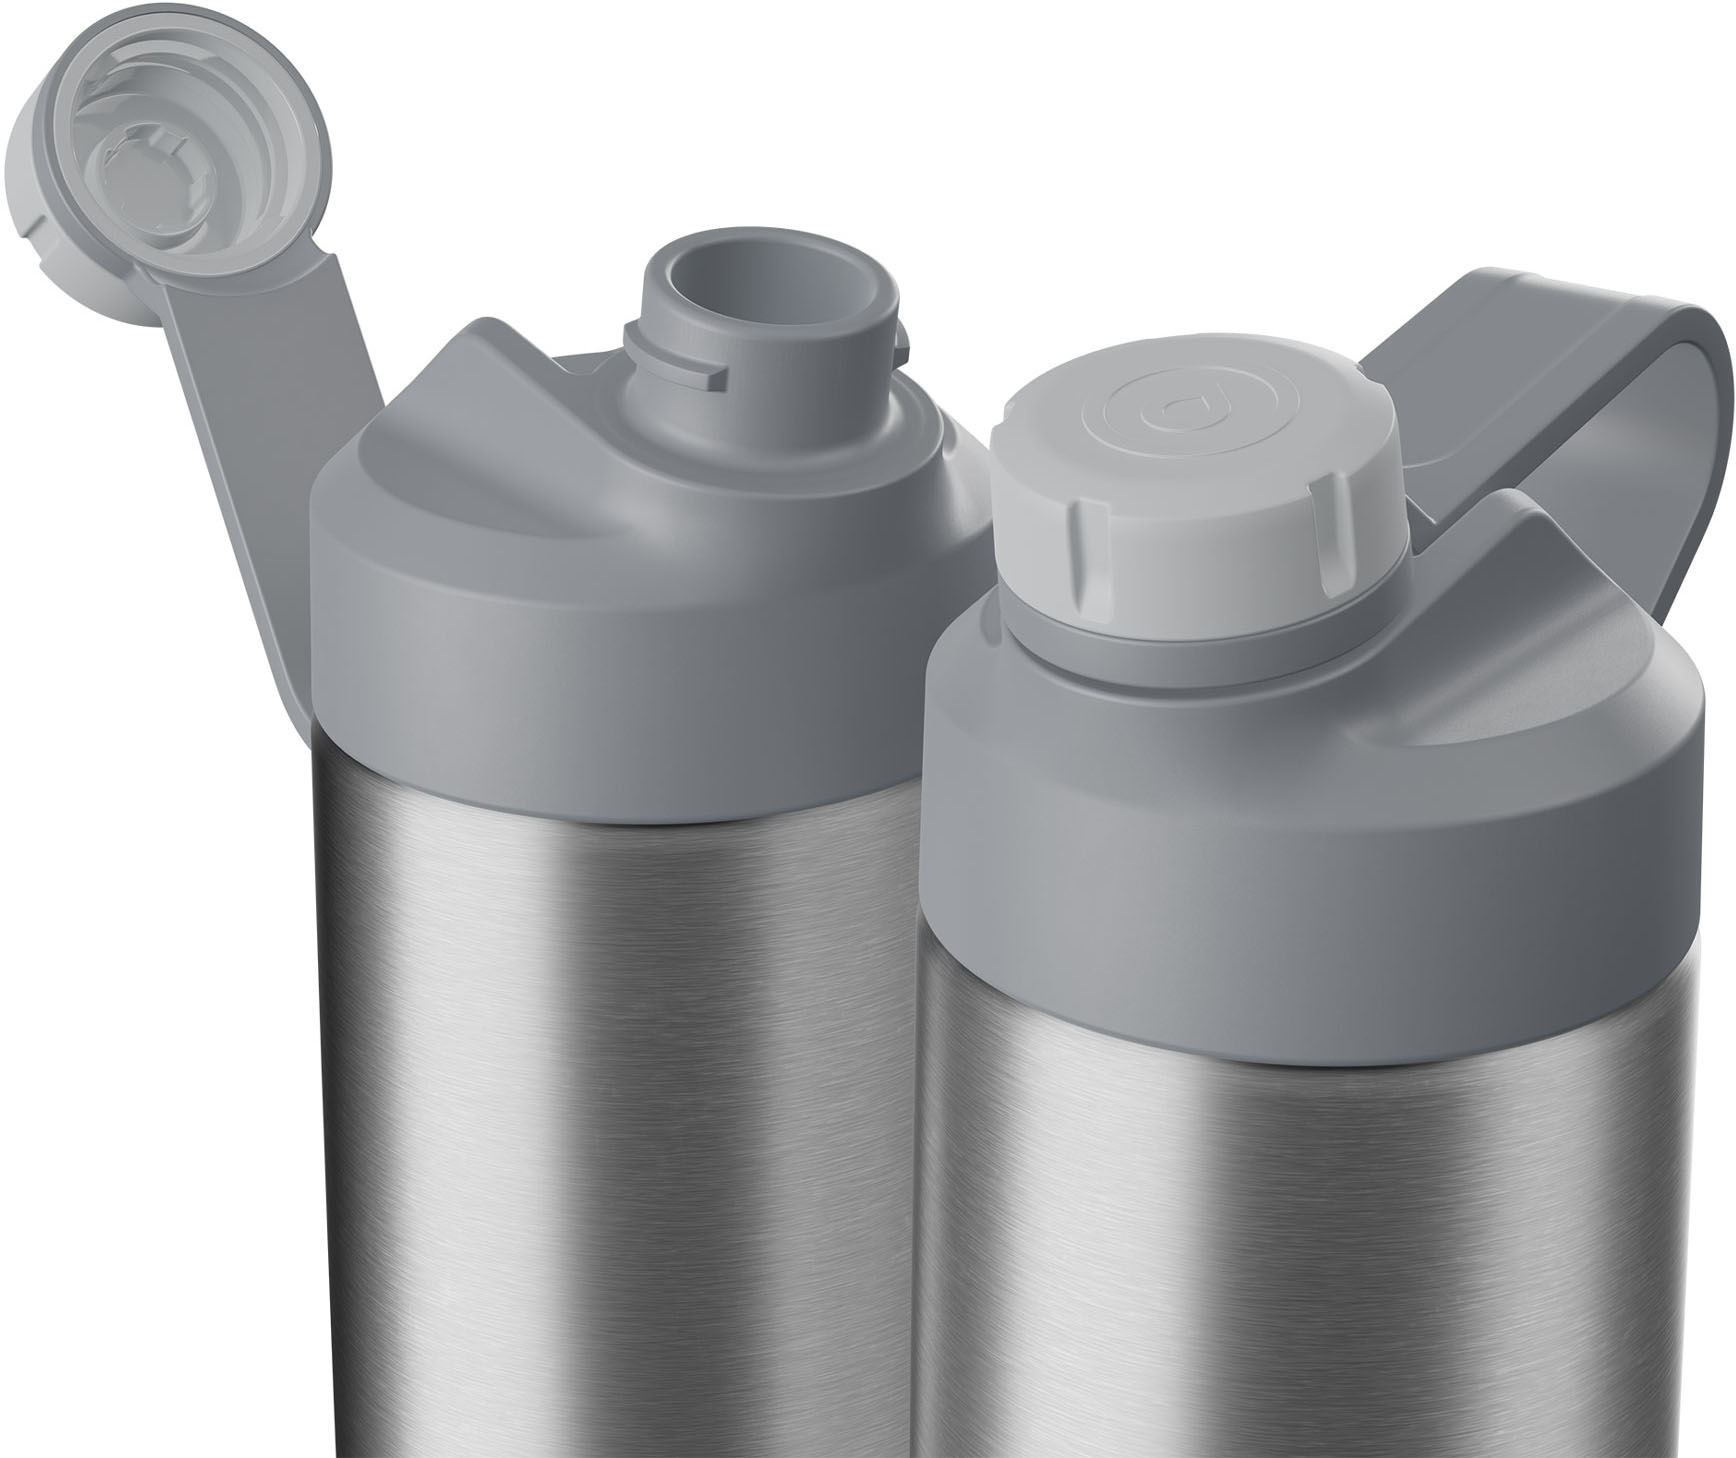 HidrateSpark TAP  20 oz / 592 ml Insulated Stainless Steel Smart Wate